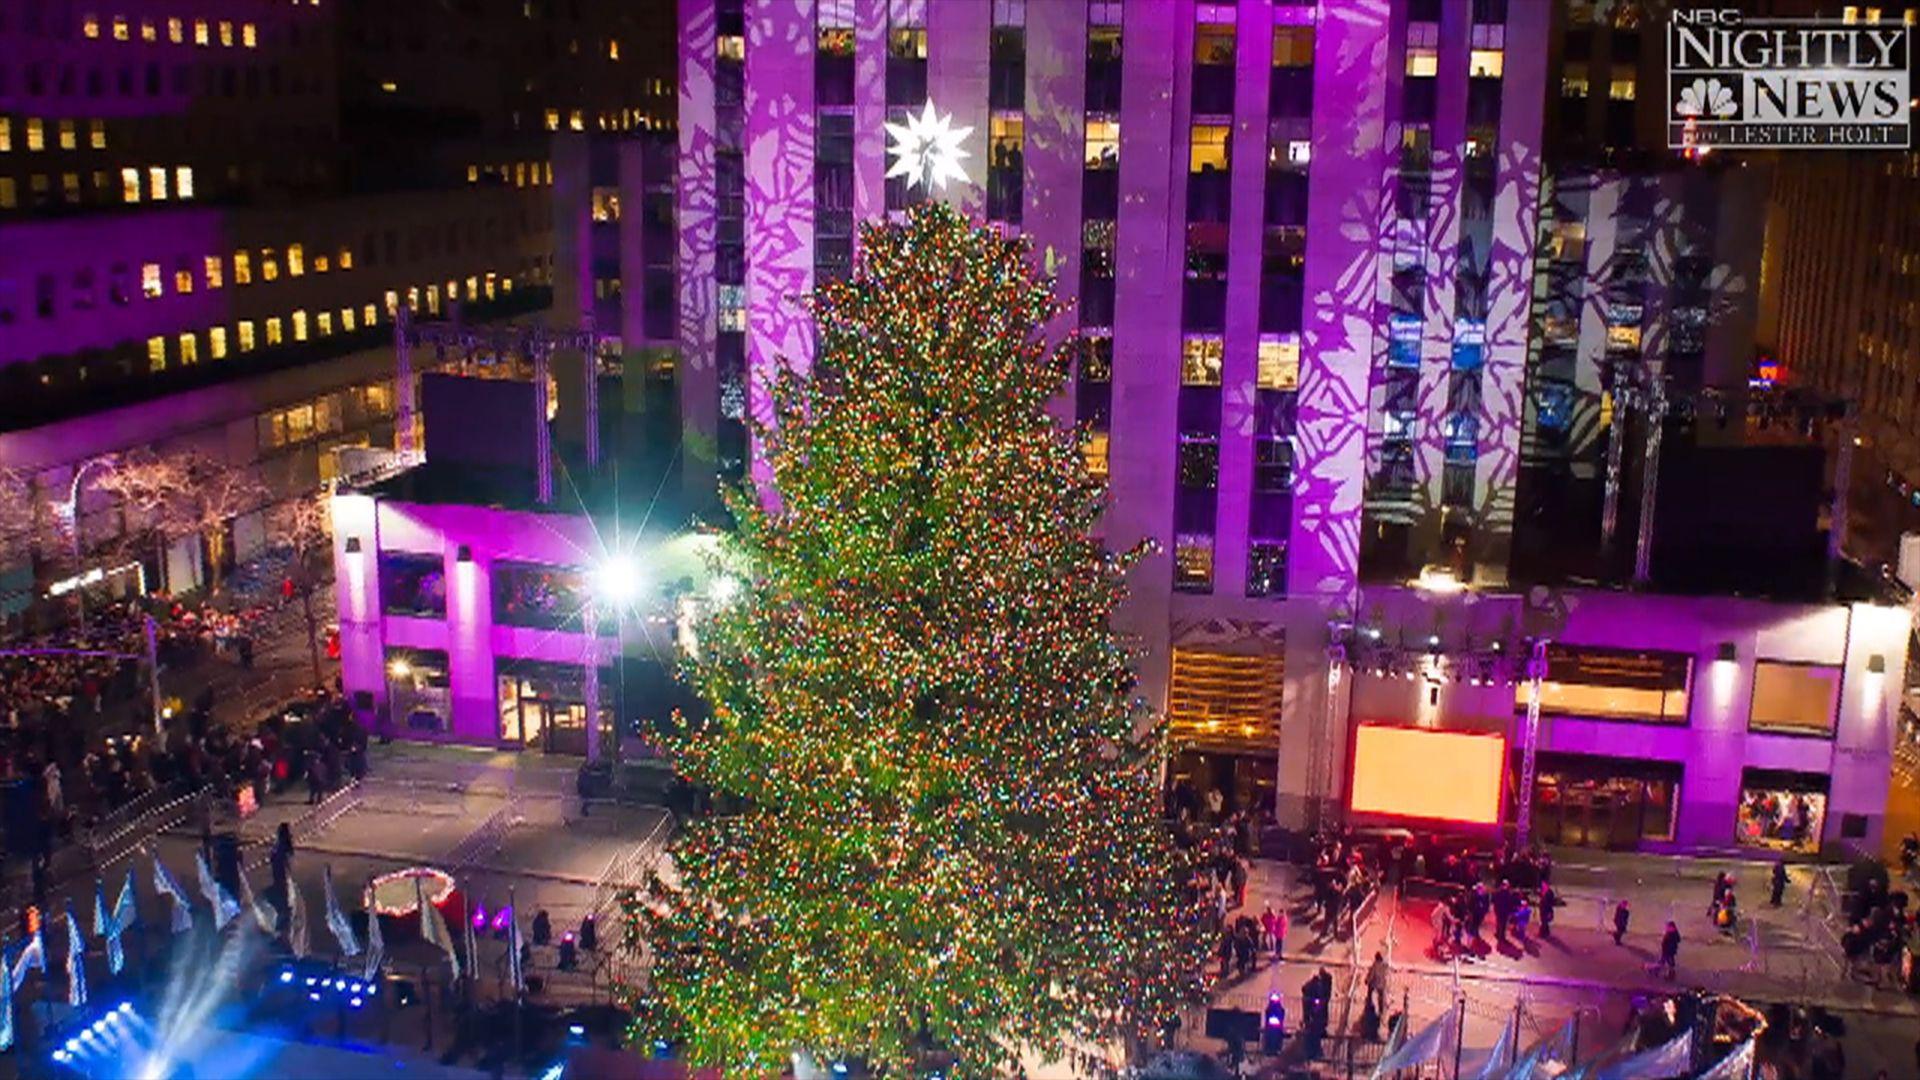 What You Didn't Know About the Rockefeller Center Christmas Tree